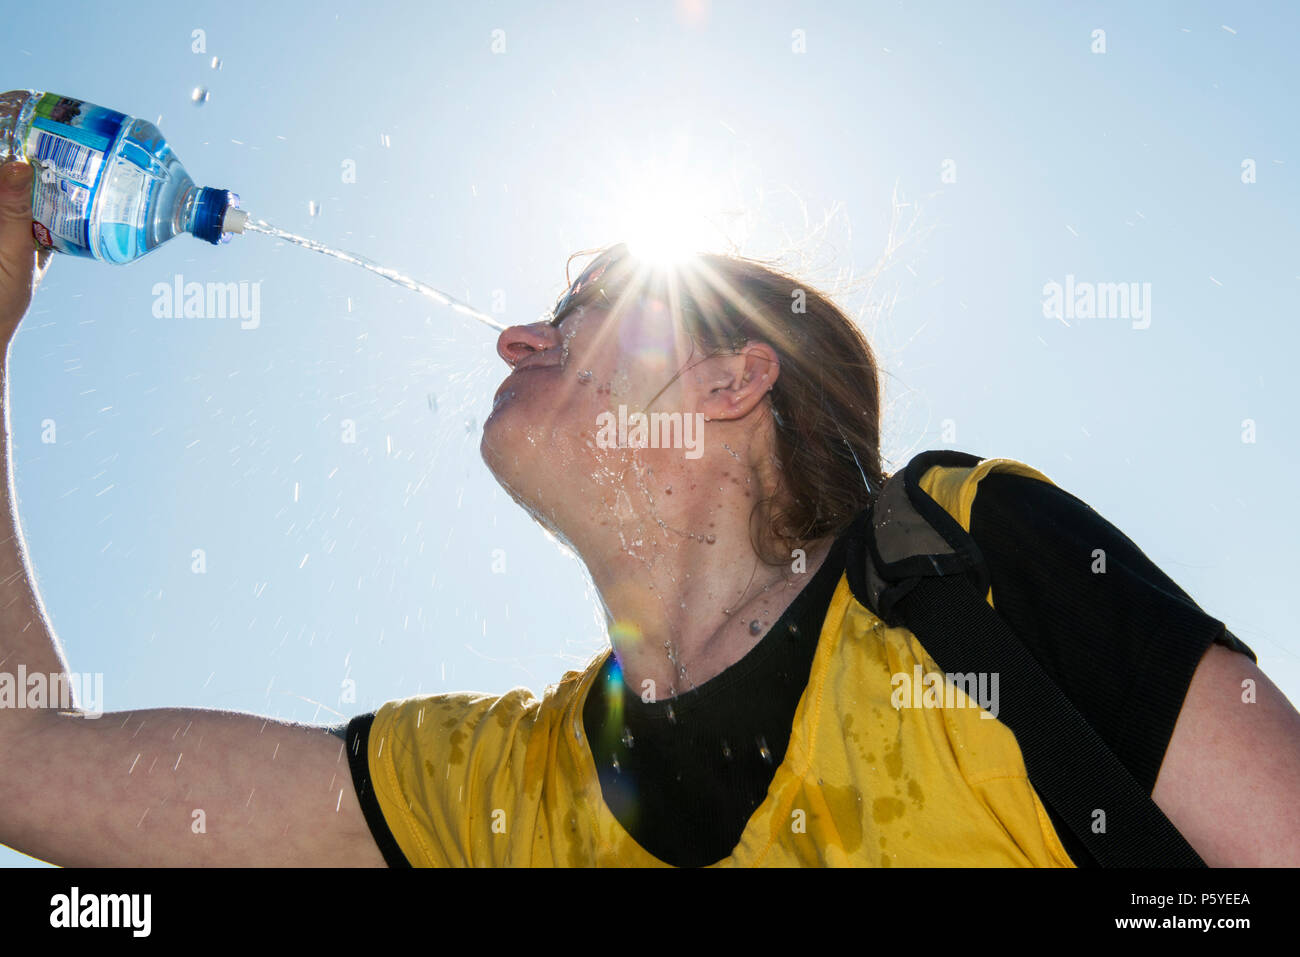 Model released woman enjoying a bottle of spring water on a hot day. Stock Photo